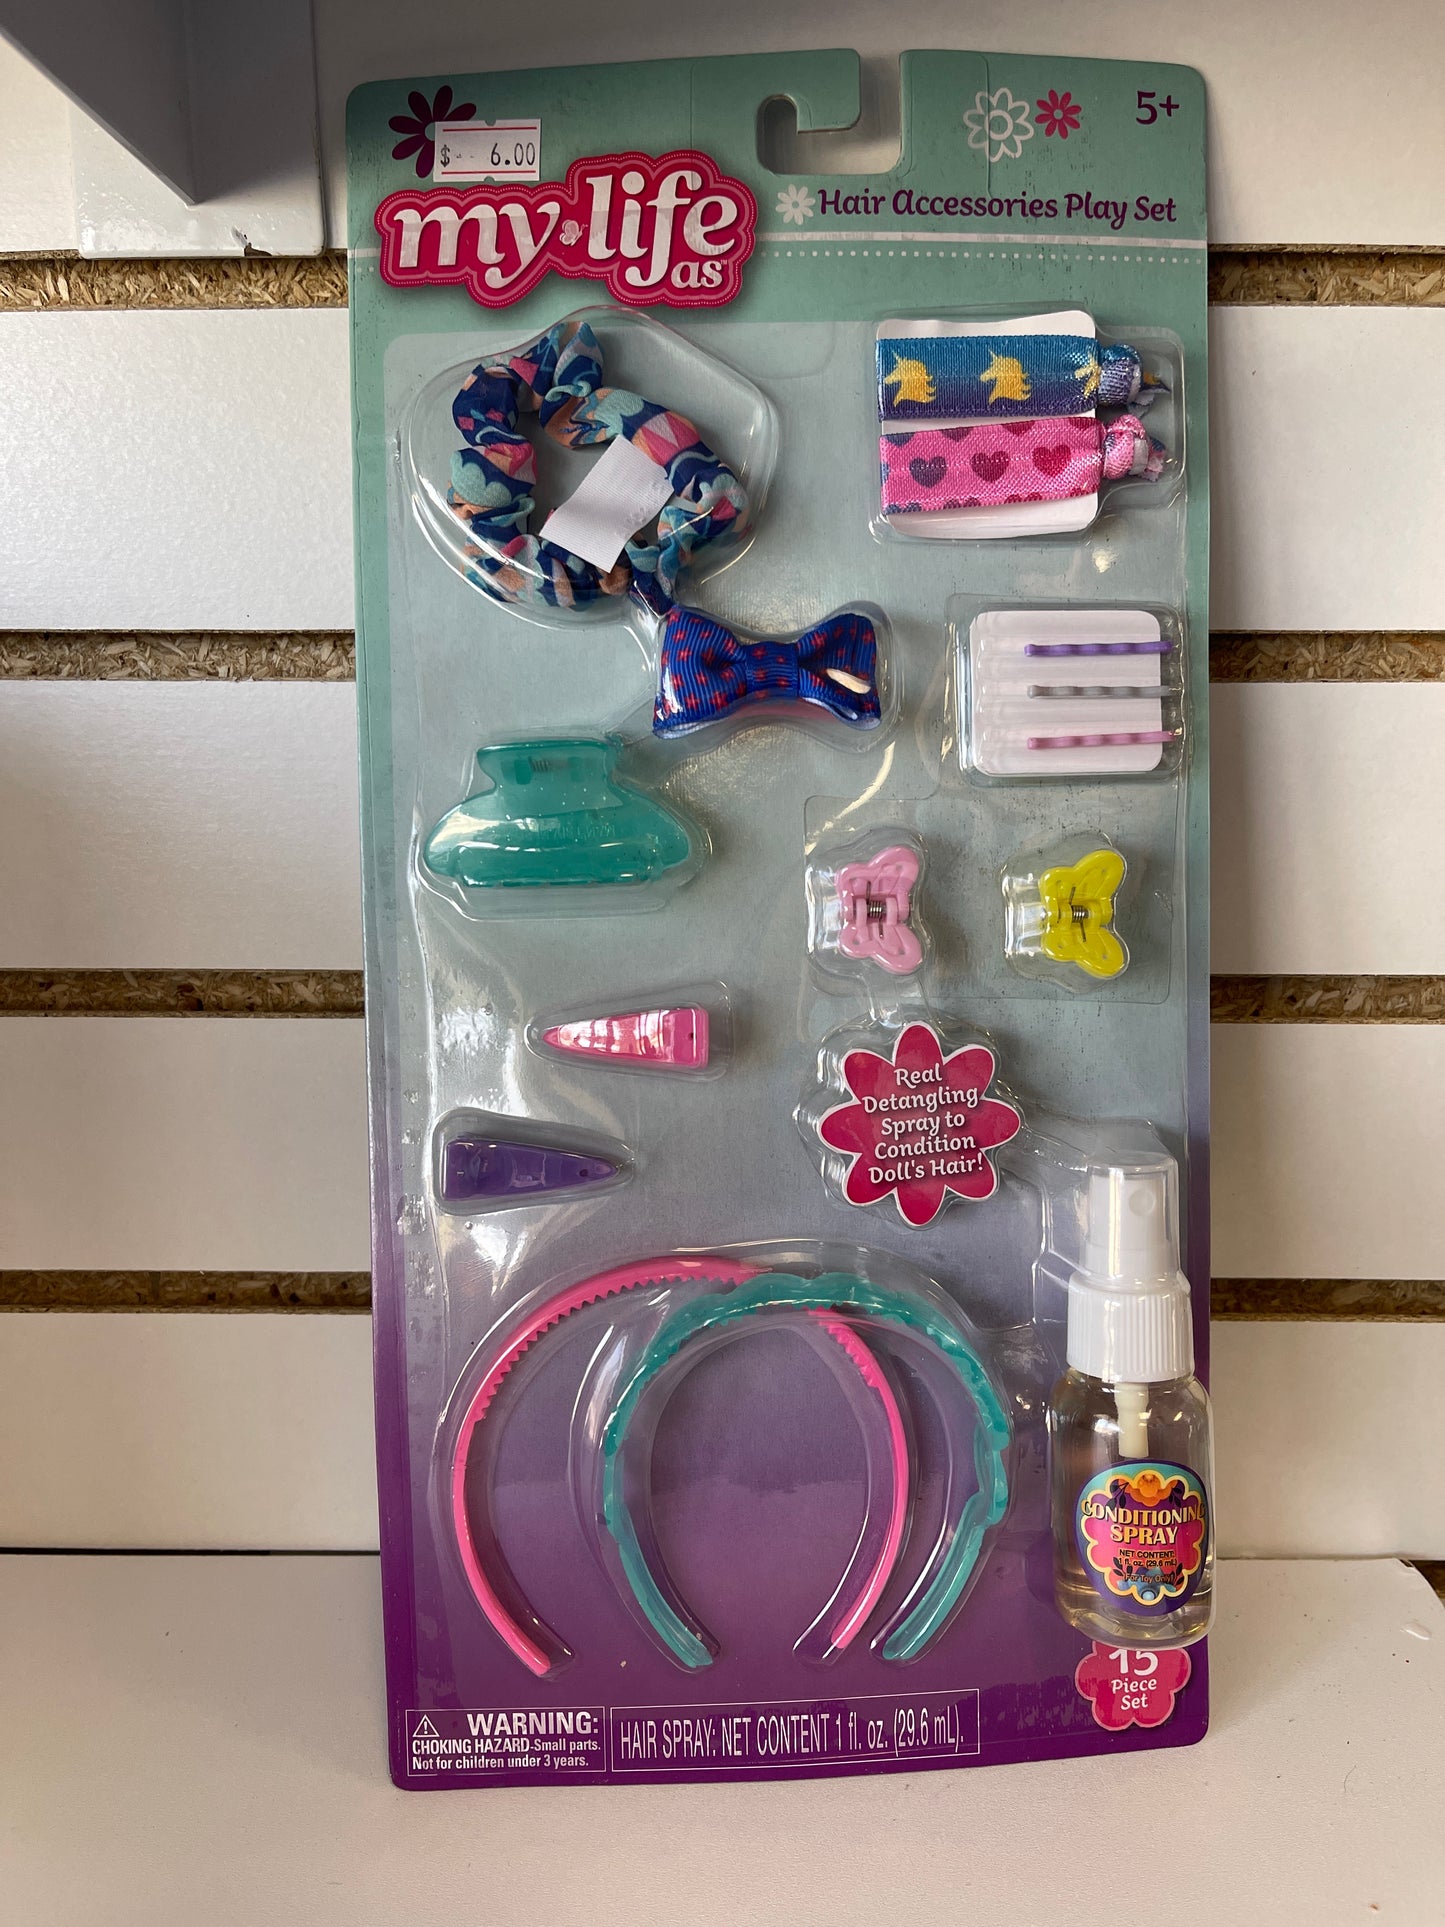 My life as Hair accessories play set